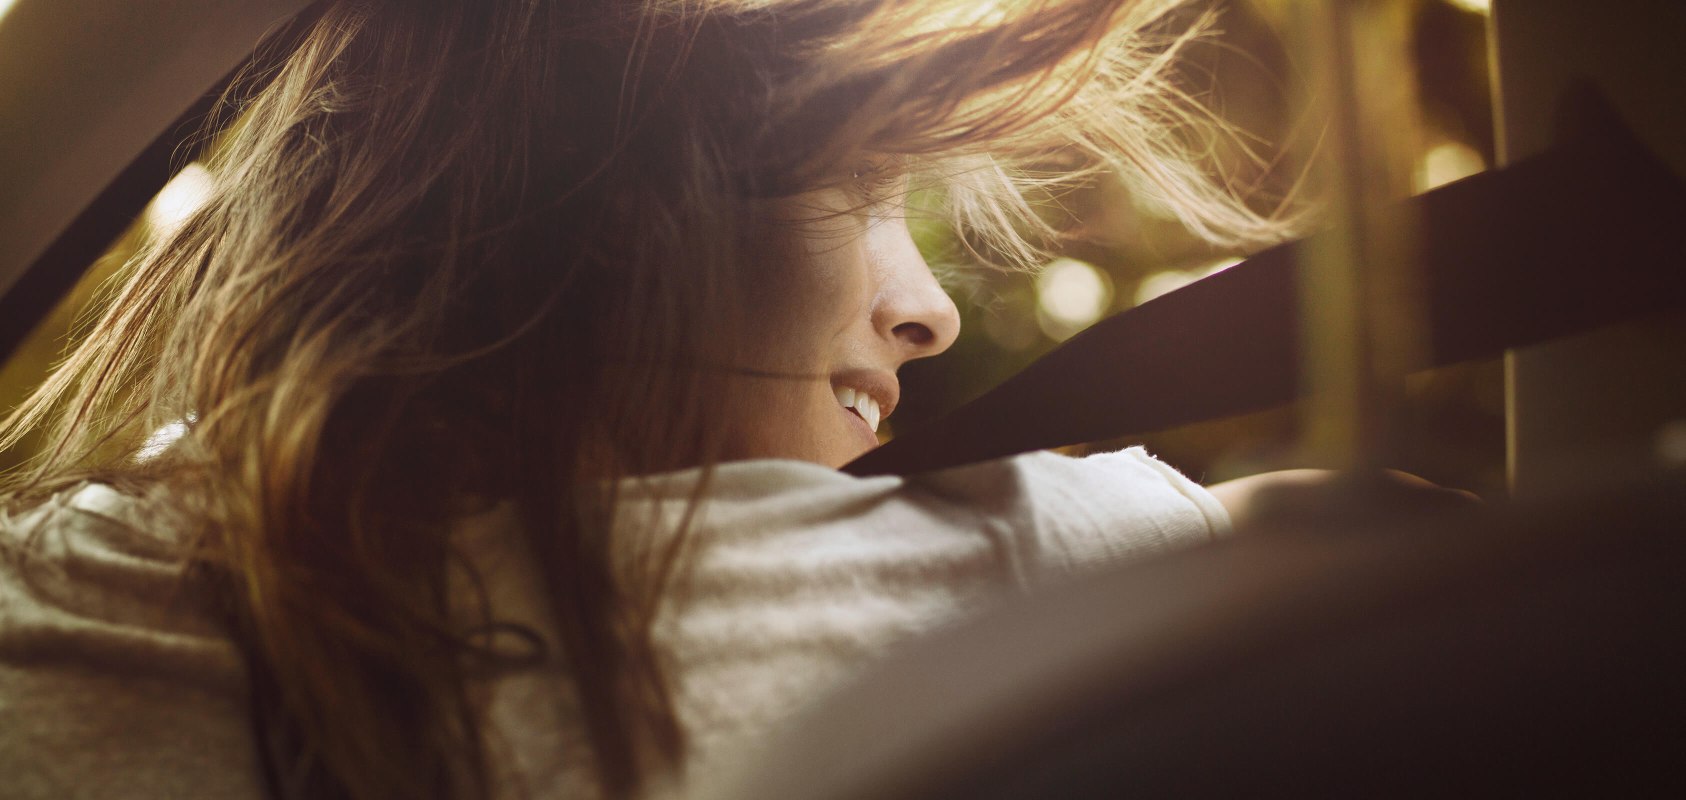 Rear view image of a woman's face with her hair blowing in the wind - SEAT Easy Mobility